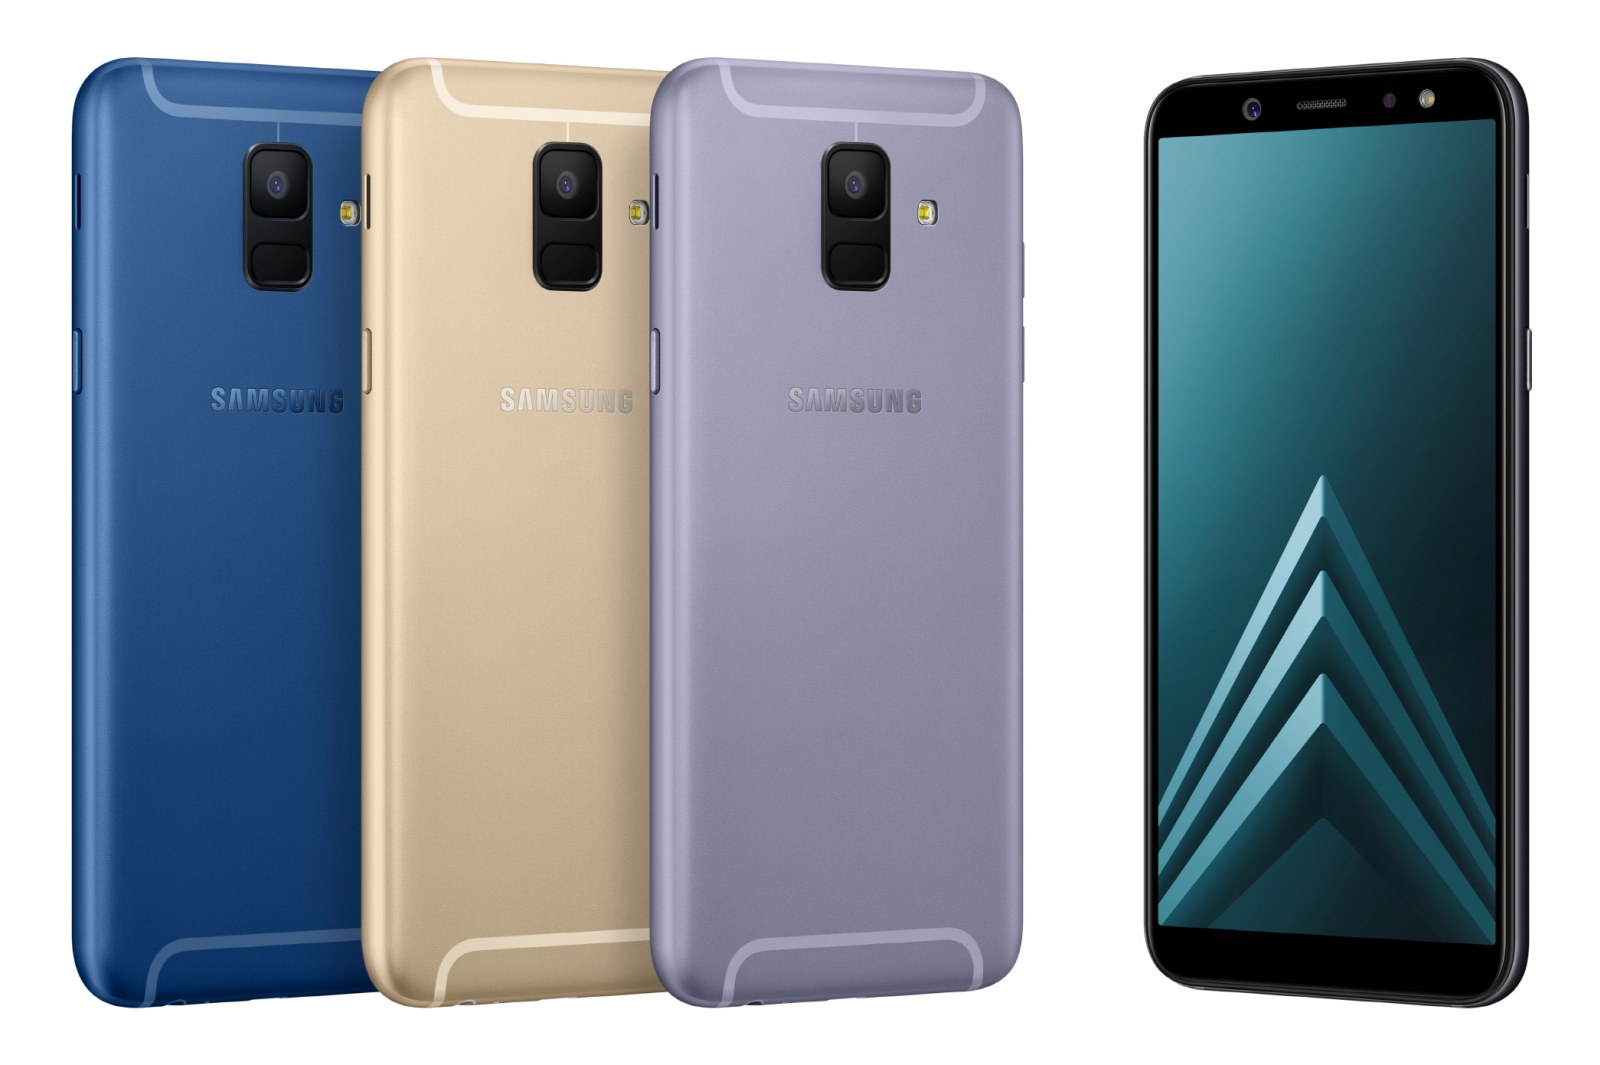 Samsung Galaxy A6 and A6 Plus officially. We know their specs